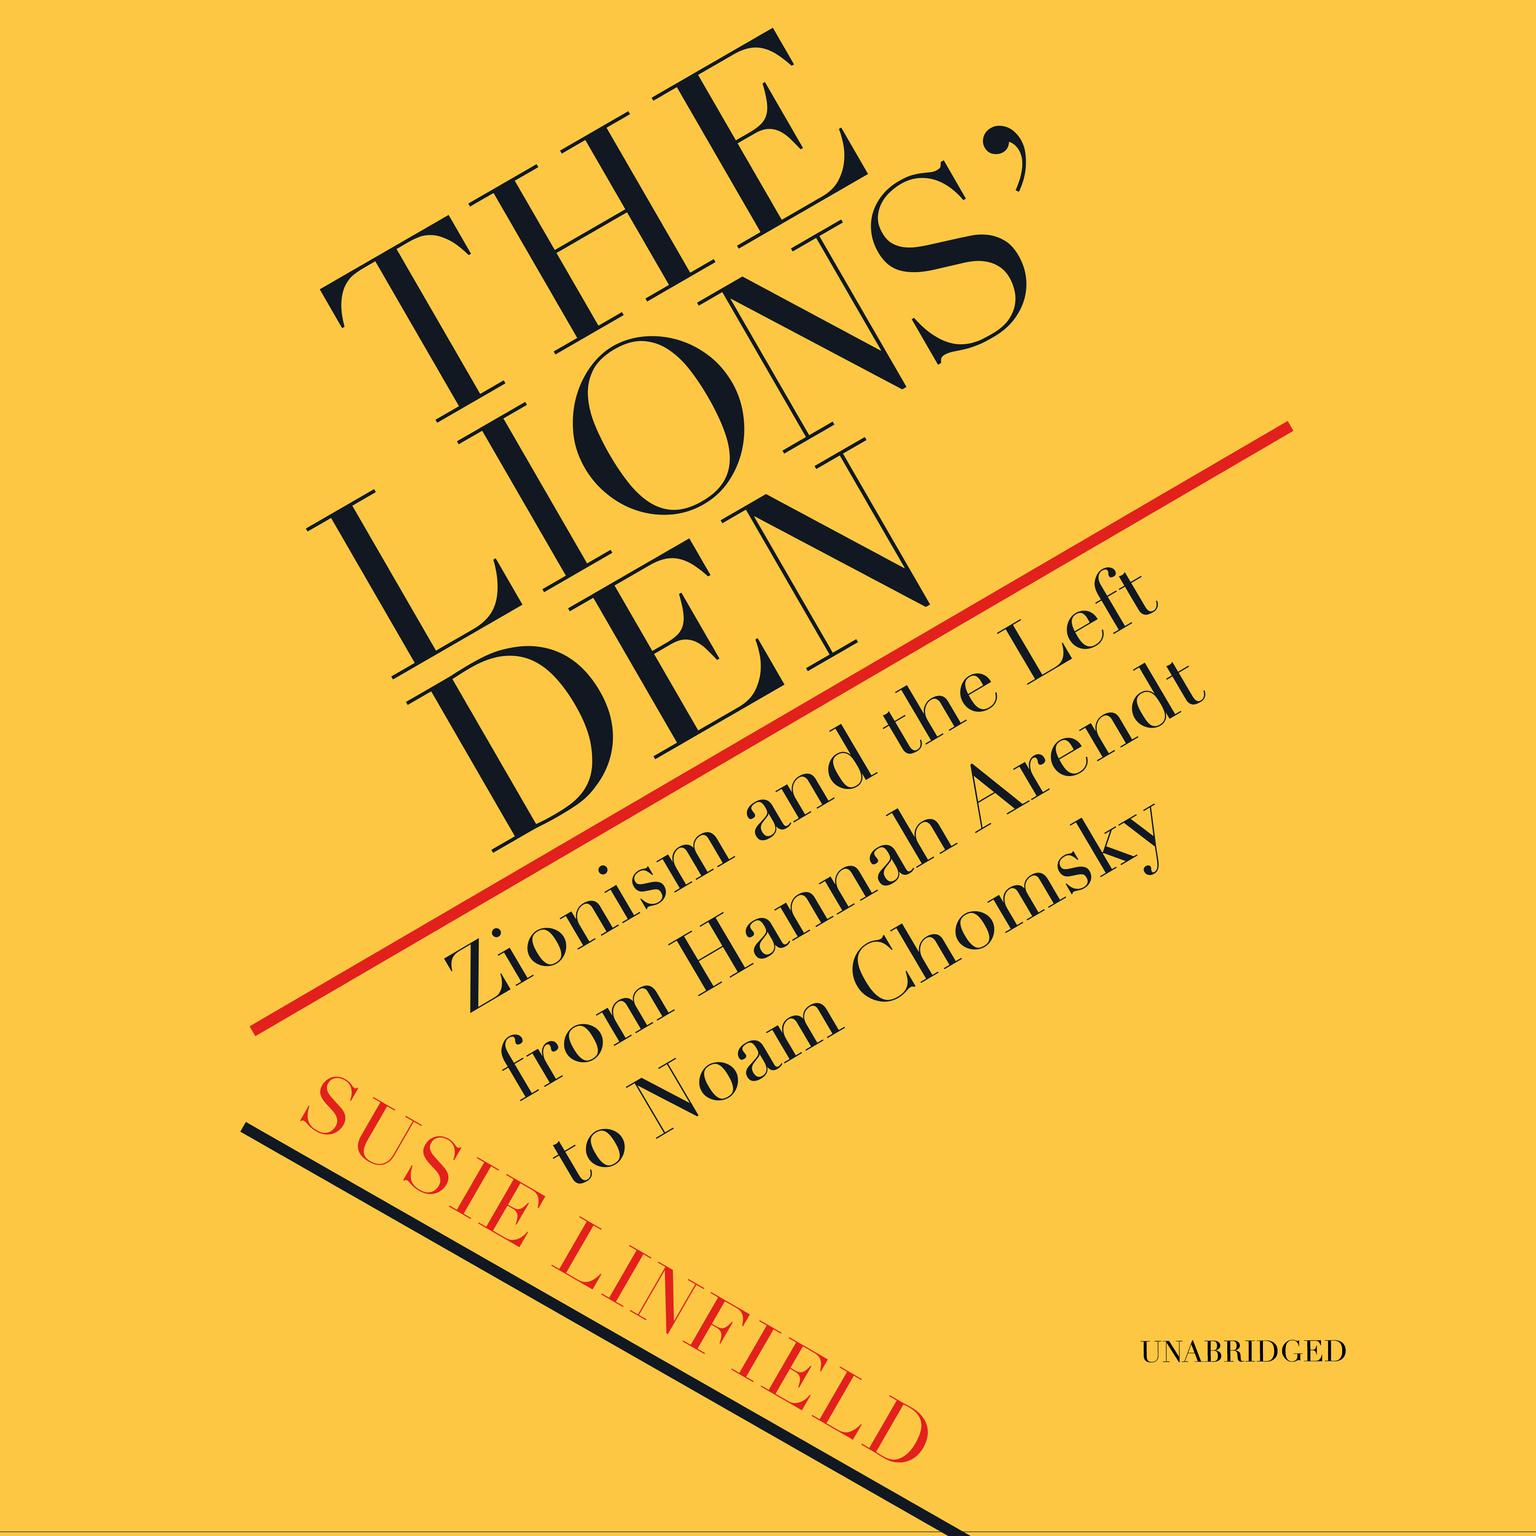 The Lions’ Den: Zionism and the Left from Hannah Arendt to Noam Chomsky Audiobook, by Susie Linfield